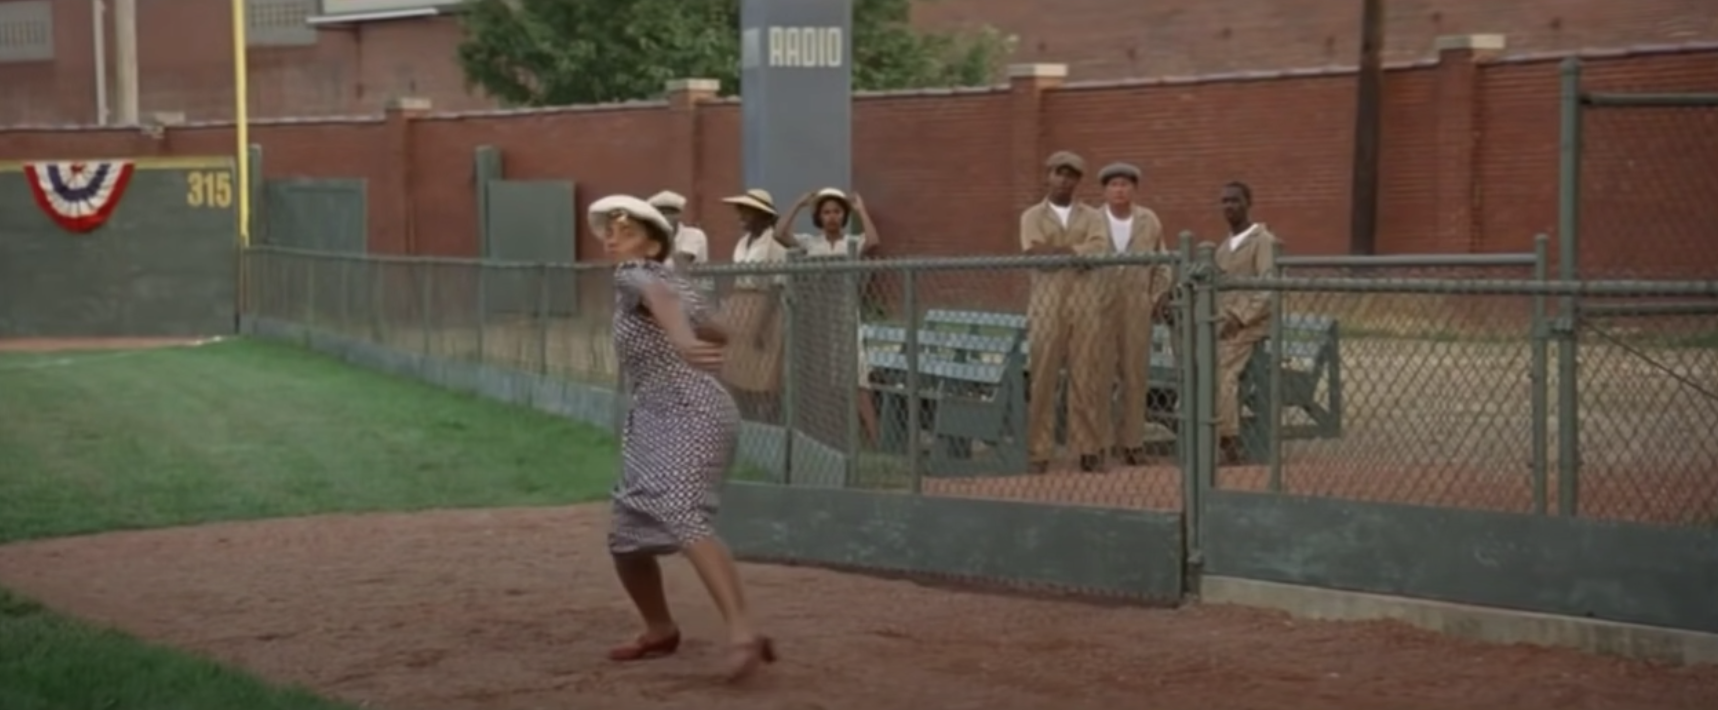 A woman throws a ball by a fence